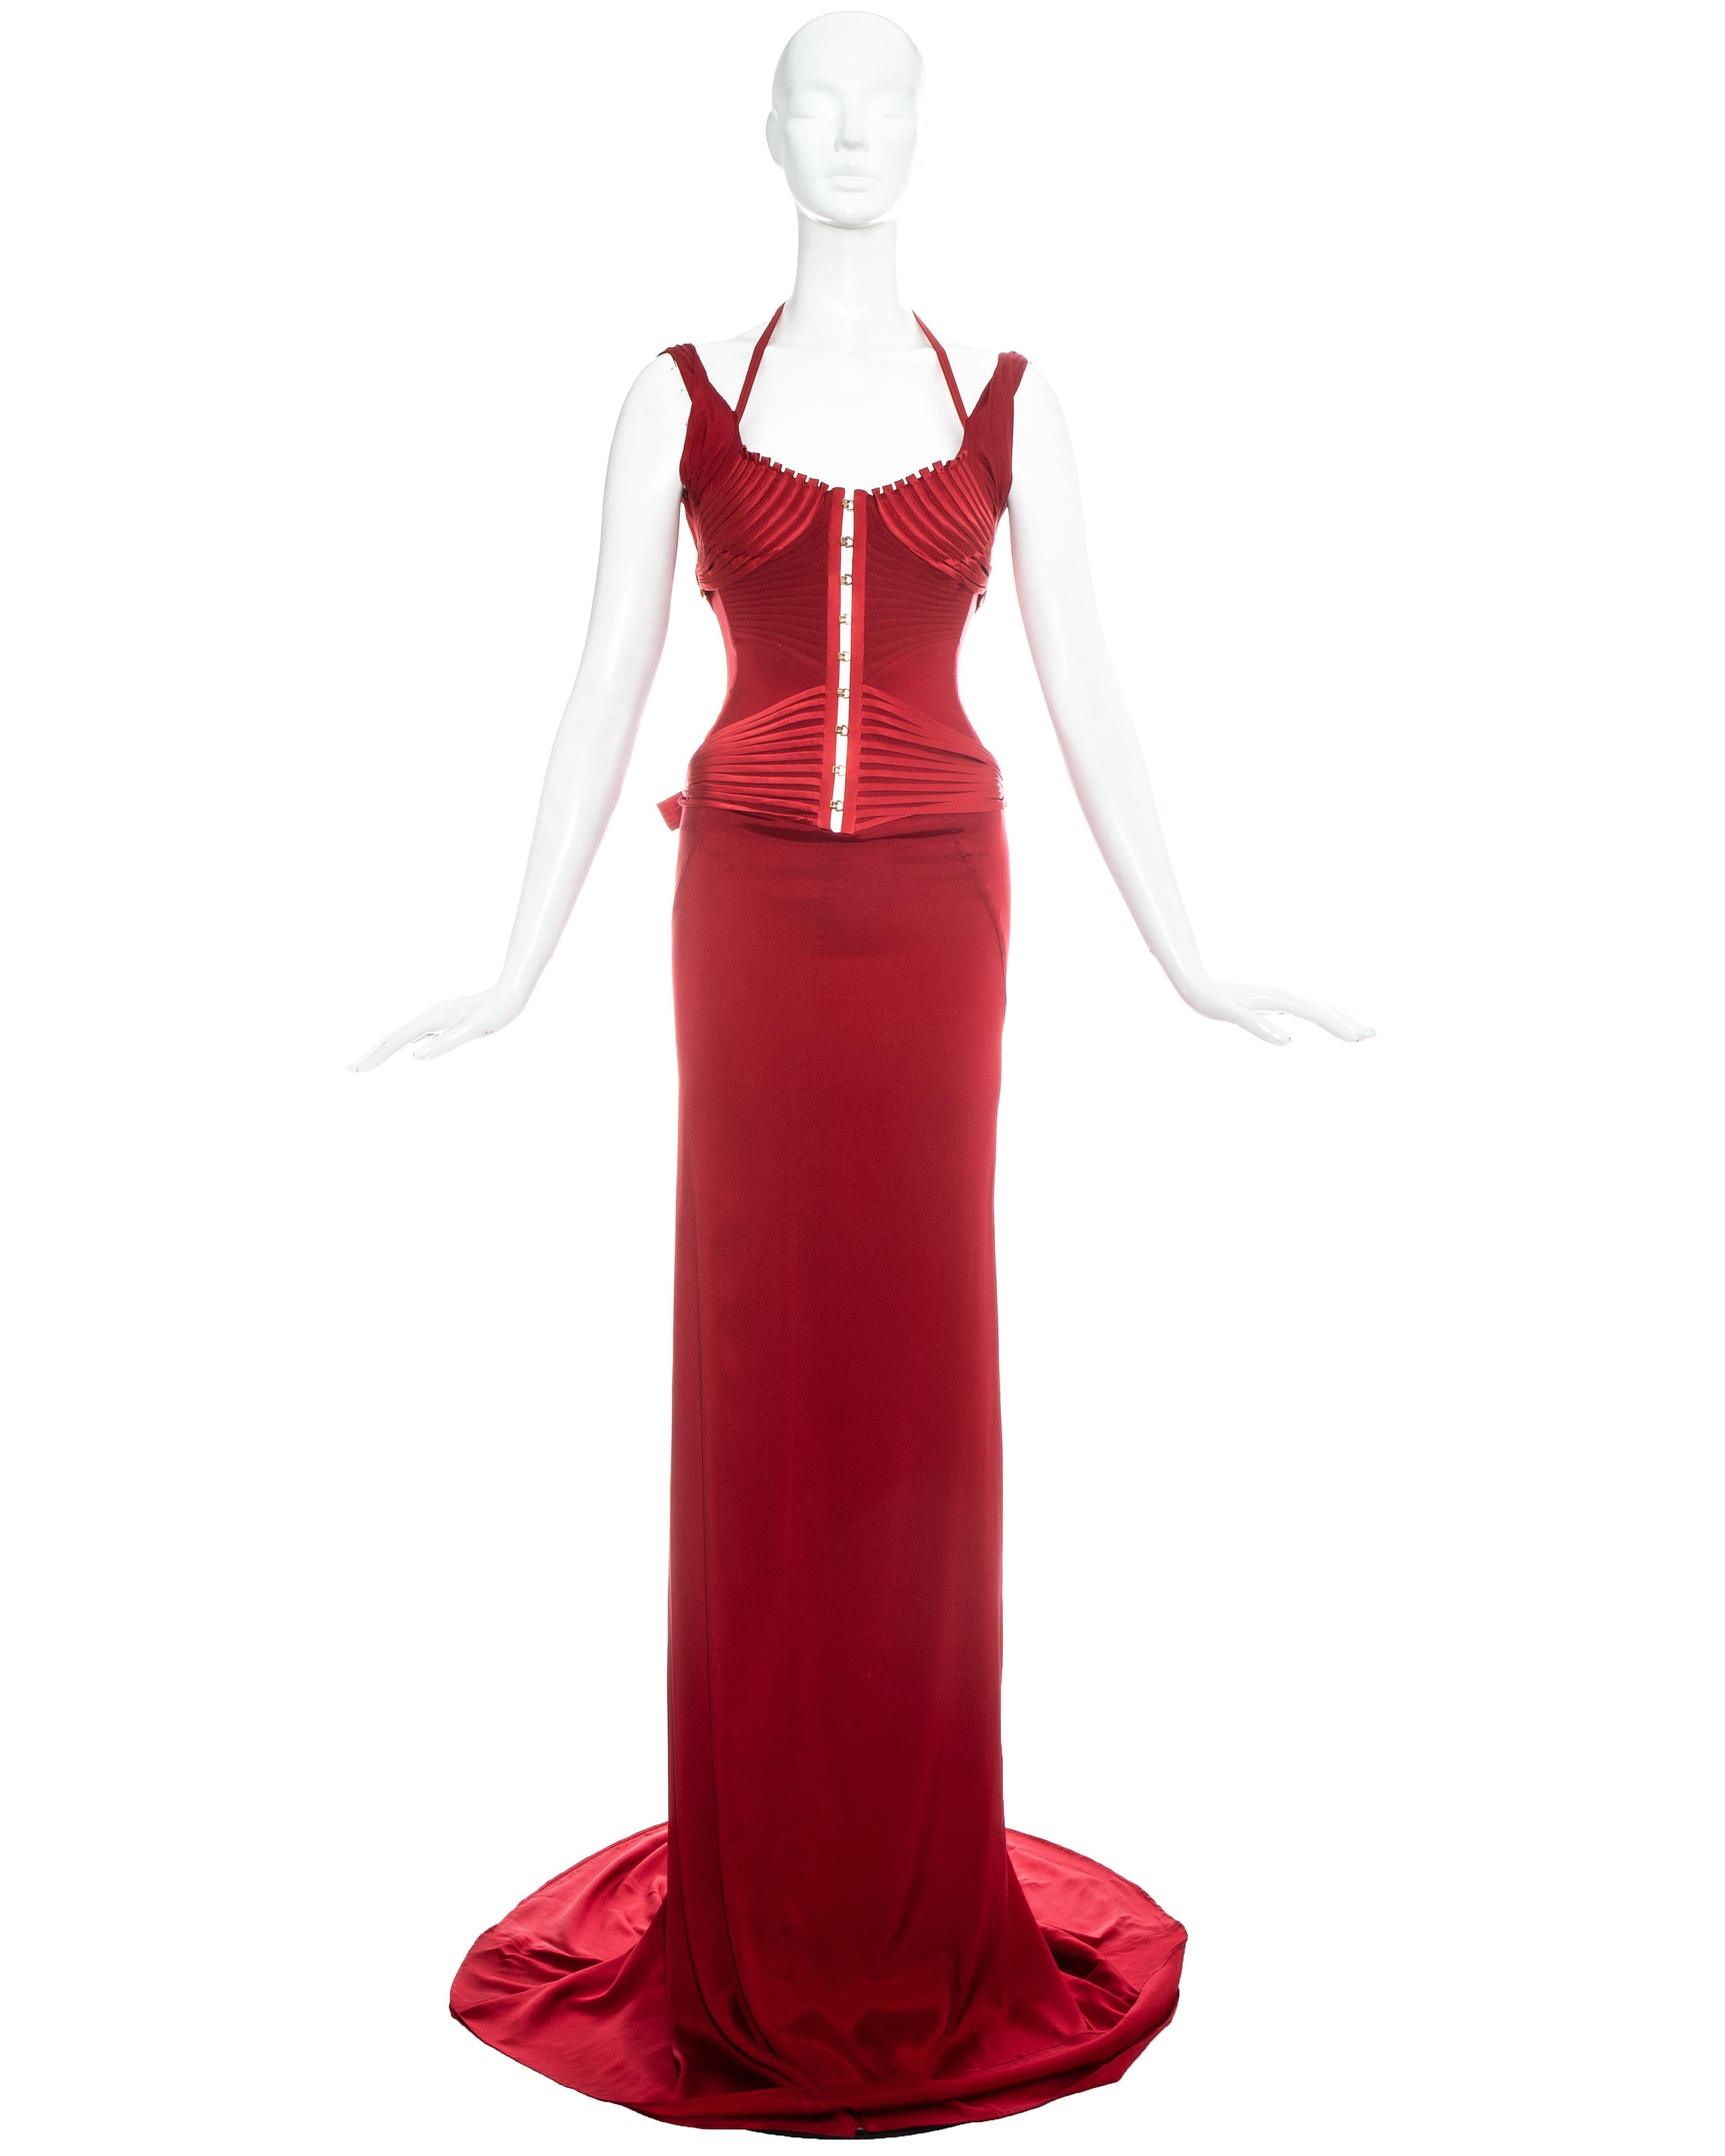 Gucci by Tom Ford red silk corseted trained evening dress with appliquéd ribbons around bodice, hook closures down centre front and four buckle fastenings on the sides

Fall-Winter 2003